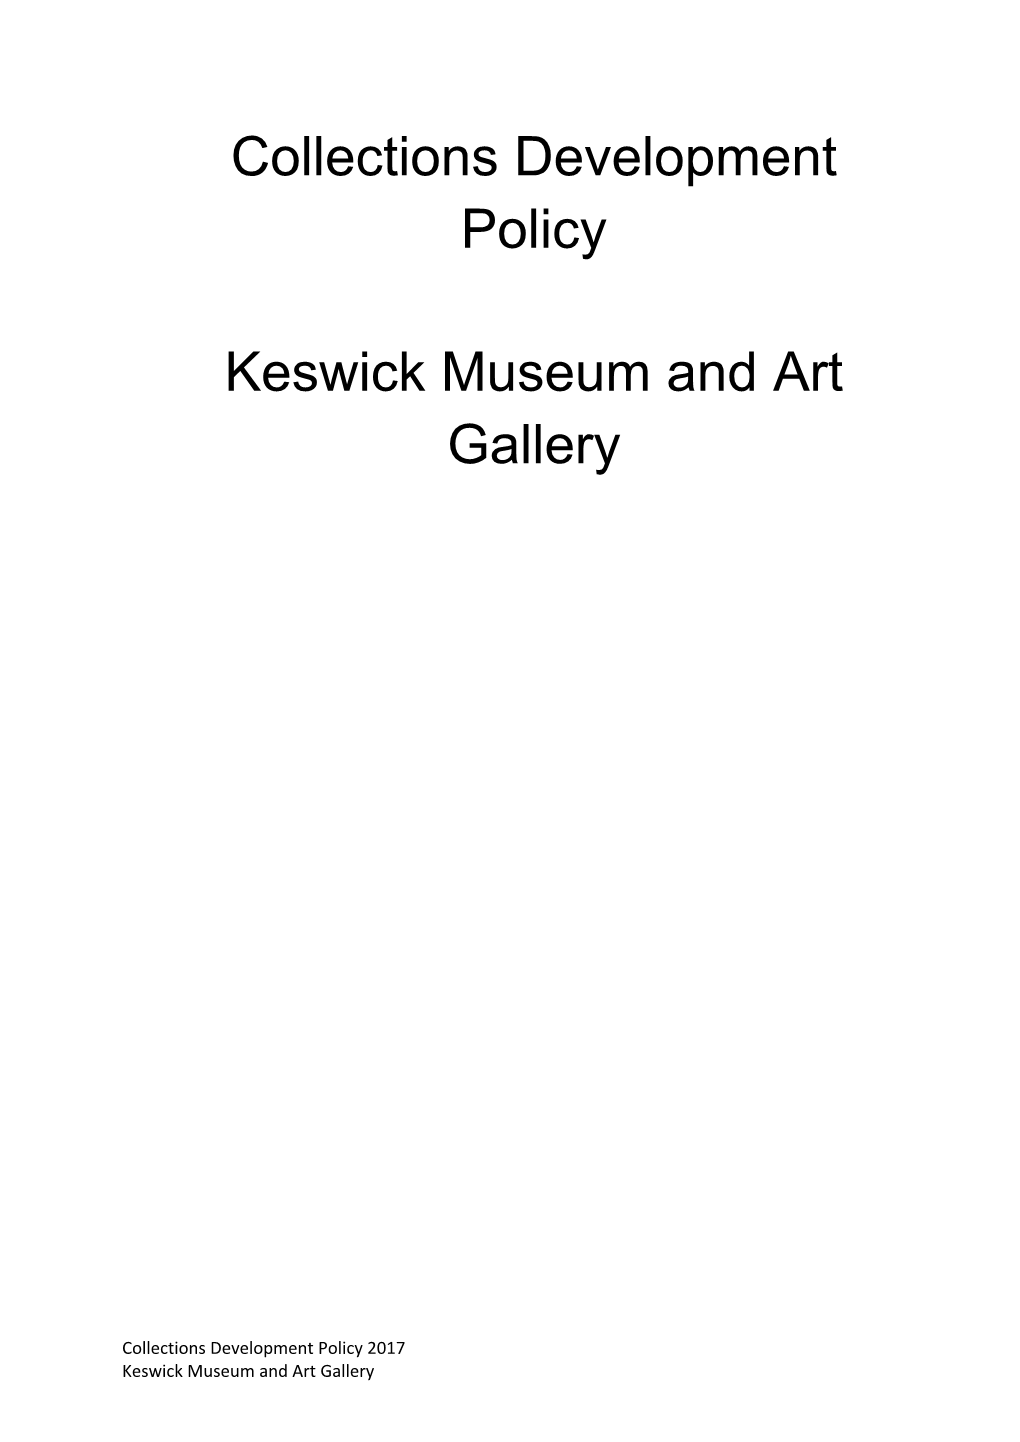 Collections Development Policy Keswick Museum and Art Gallery